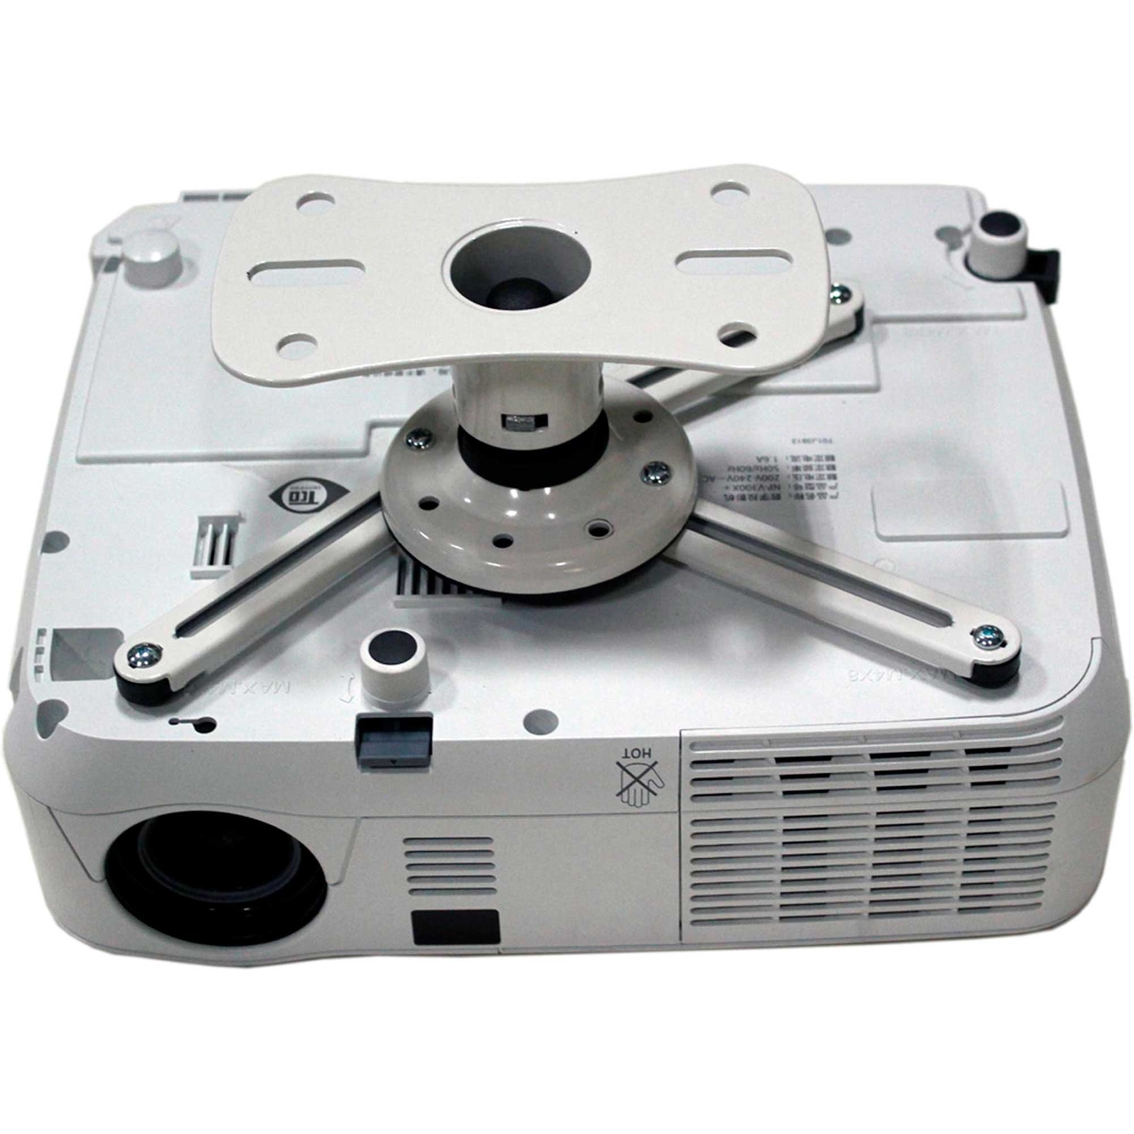 Kanto P101W Universal Projector Mount - Image 4 of 5